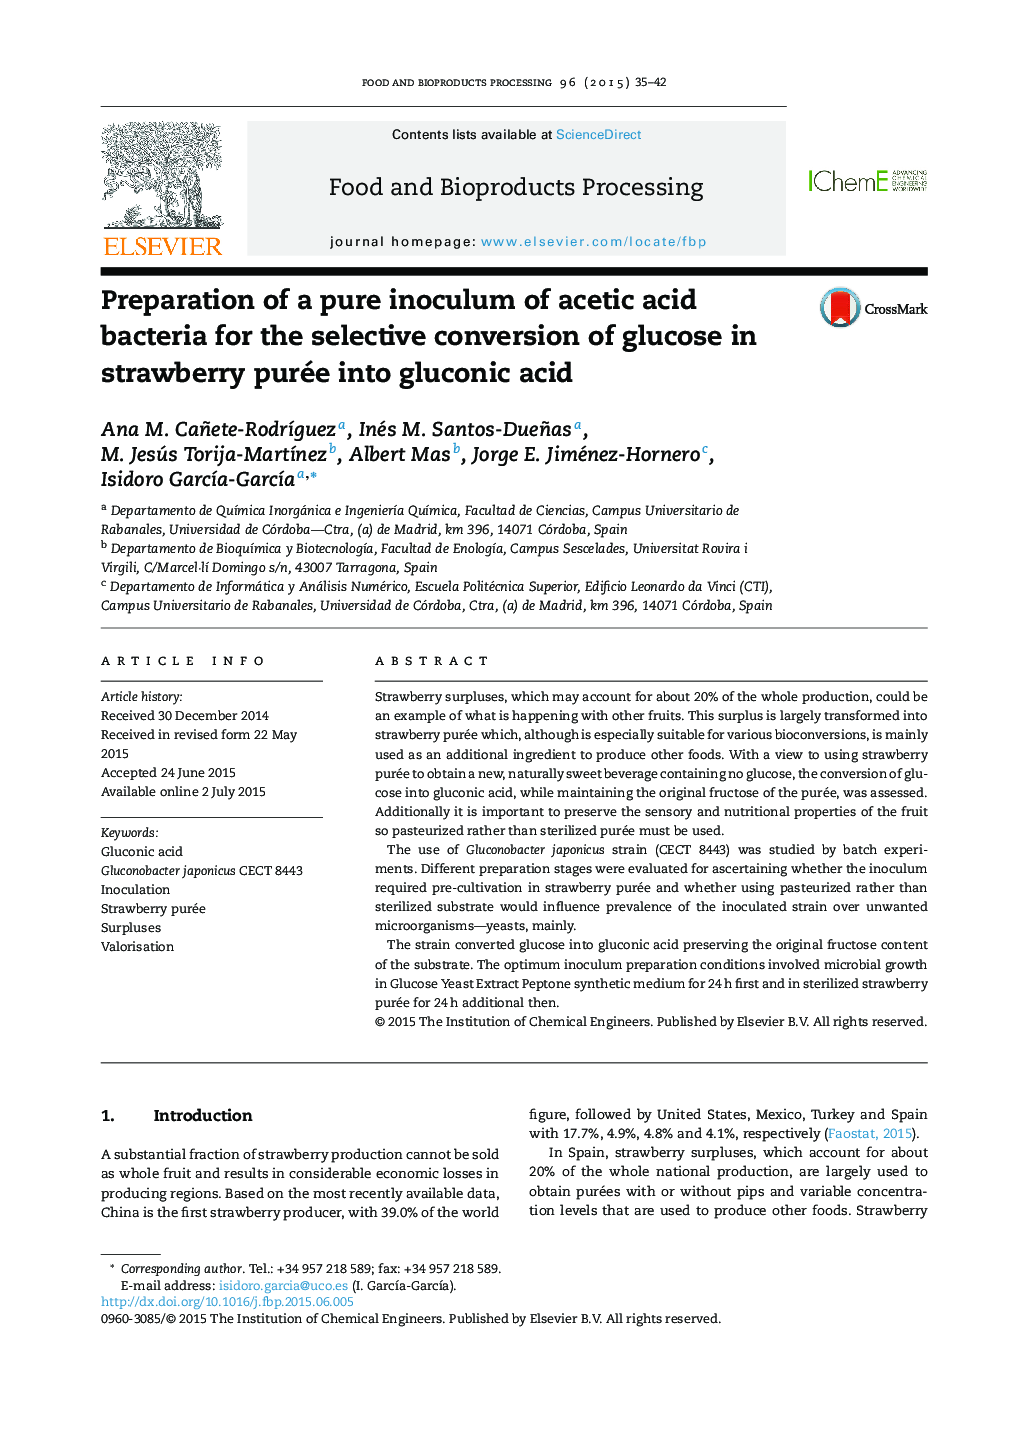 Preparation of a pure inoculum of acetic acid bacteria for the selective conversion of glucose in strawberry purée into gluconic acid